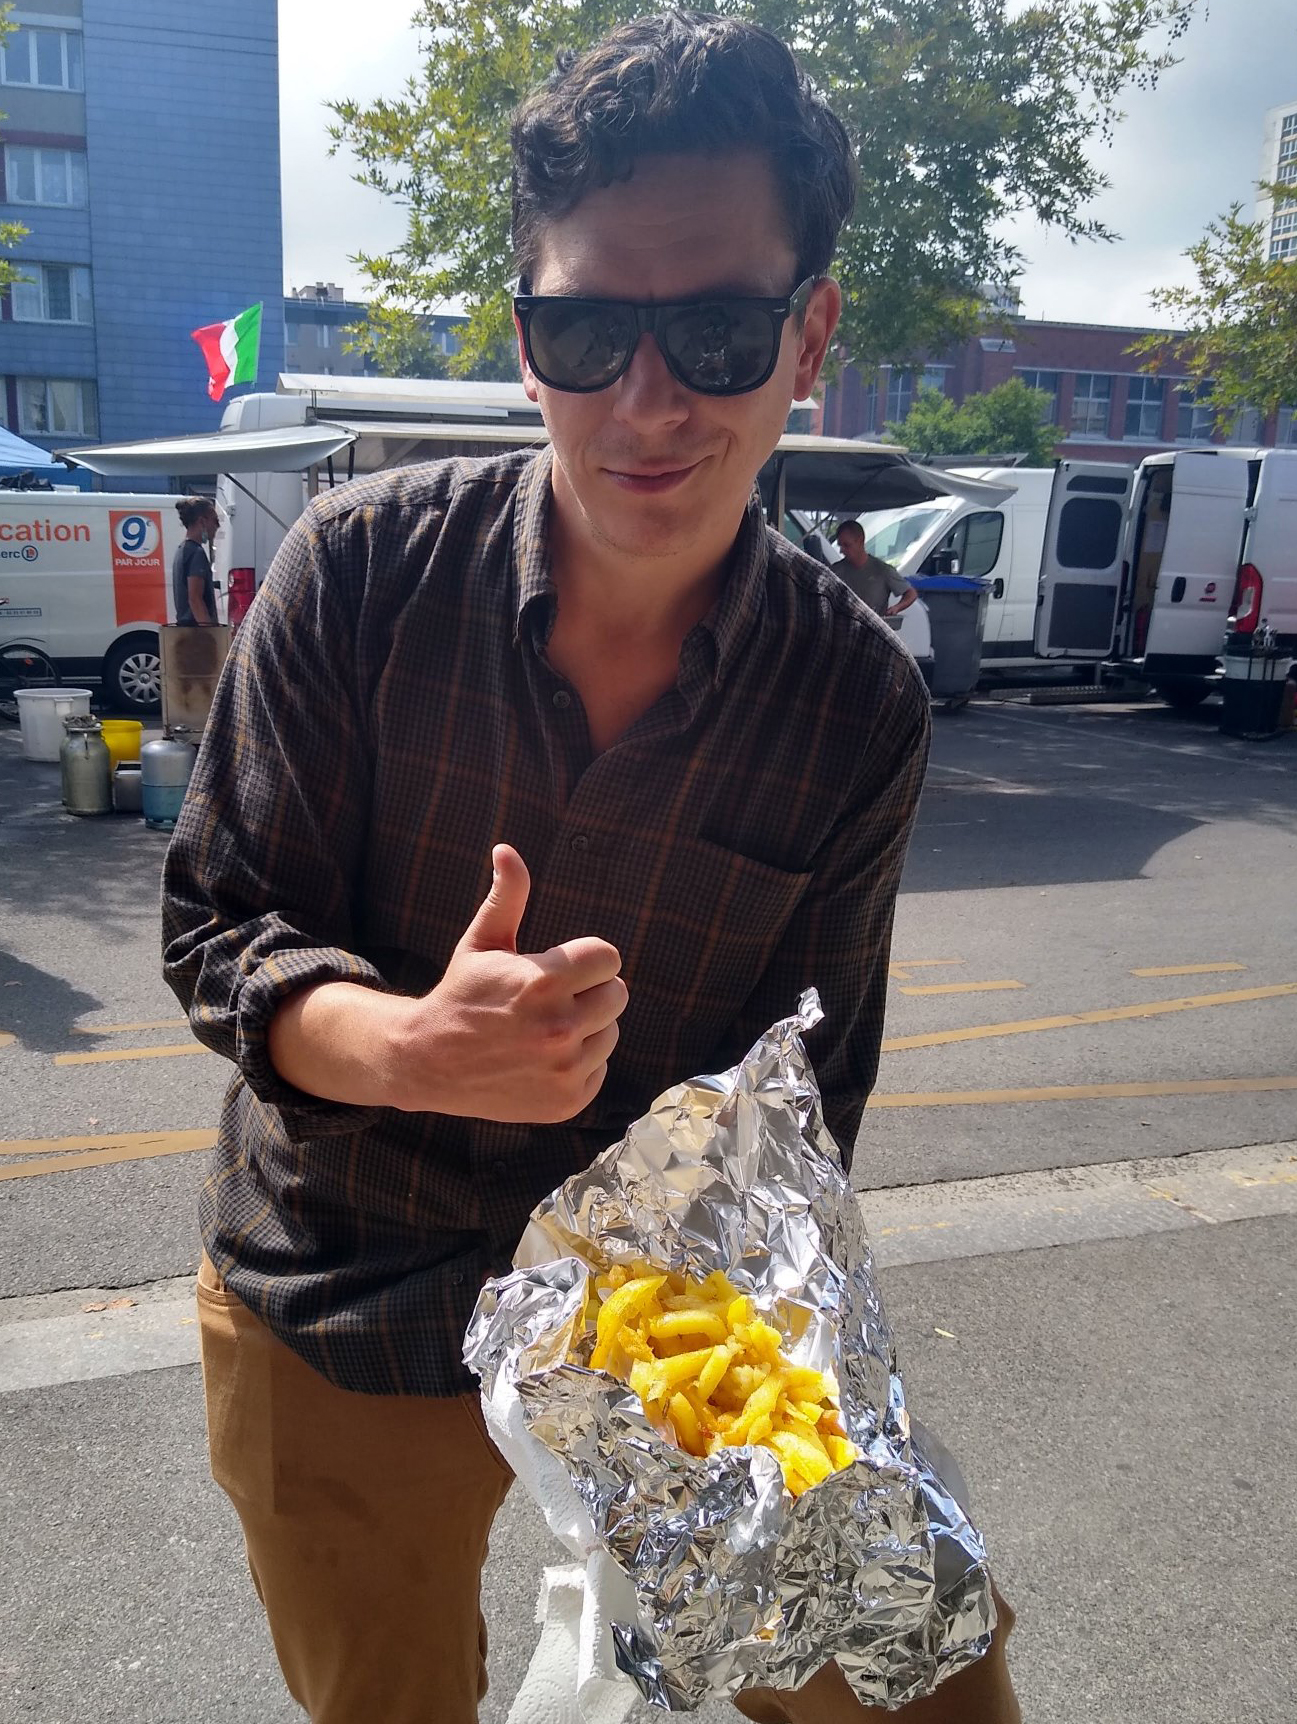 Pete in Cherbourg, France, showing off a heaping pile of frites from a street vendor.